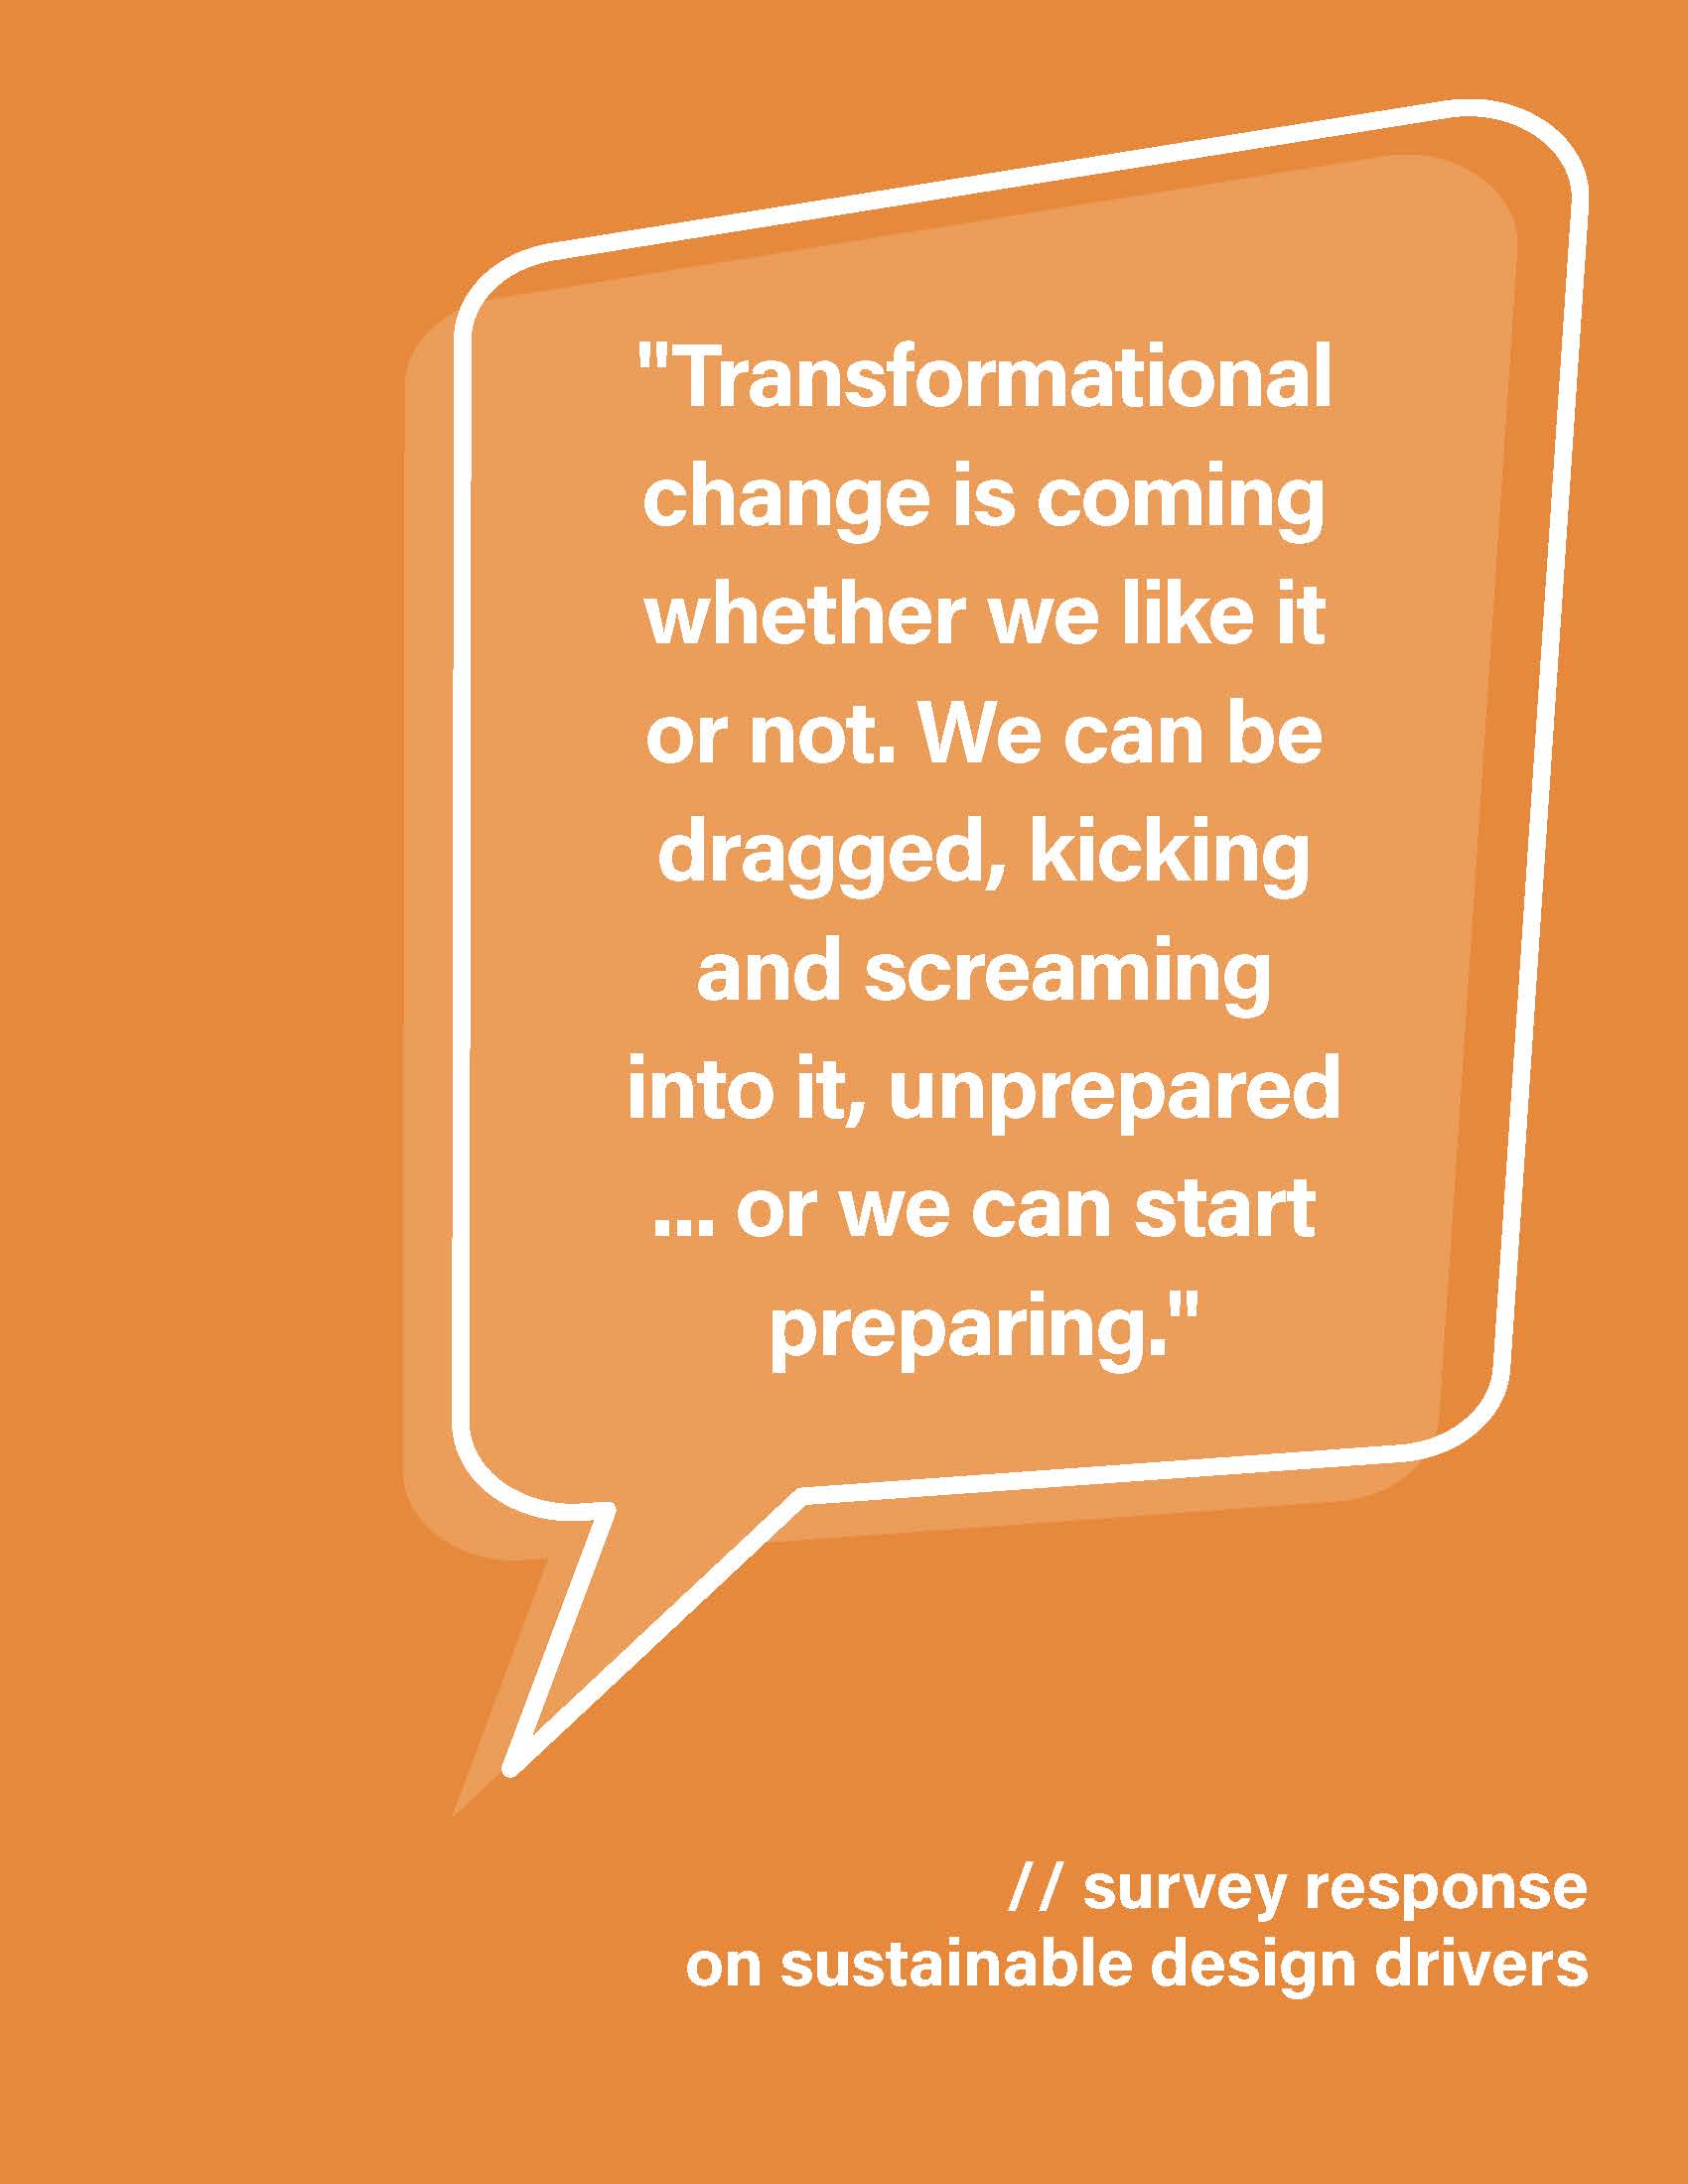 "Transformational change is coming whether we like it or not. We can be dragged, kicking and screaming into it, unprepared... or we can start preparing." survey response on sustainable design drivers